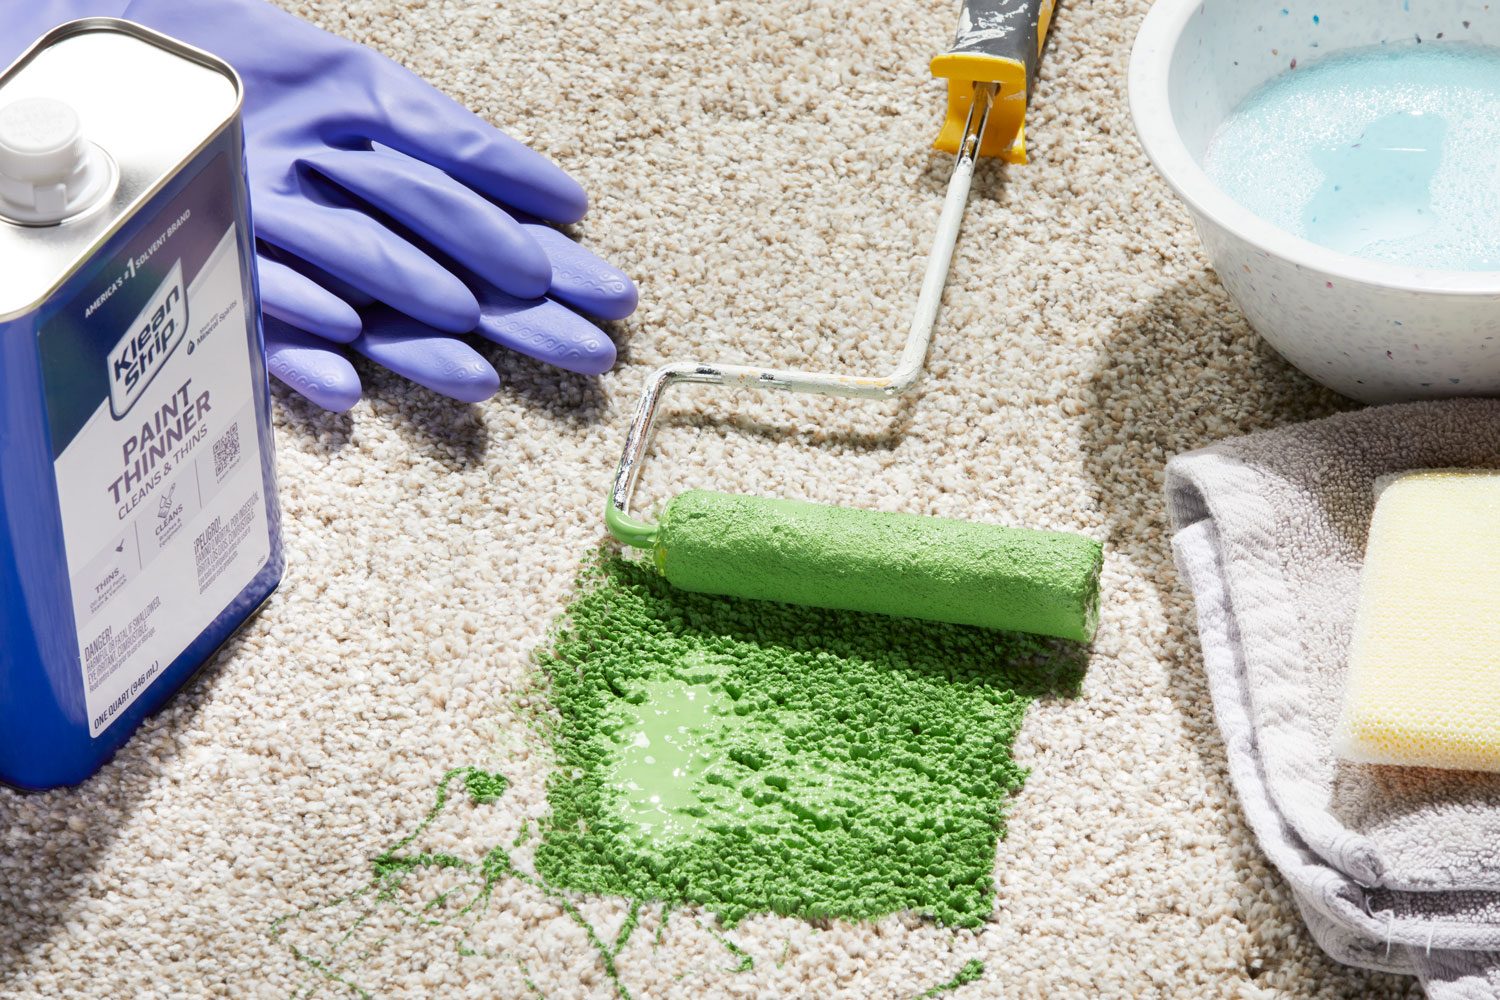 green oil-based paint and paint roller on a light carpet causing a stain; cleaning products surrounding: paint thinner, gloves, bowl of soapy water, towel, sponge